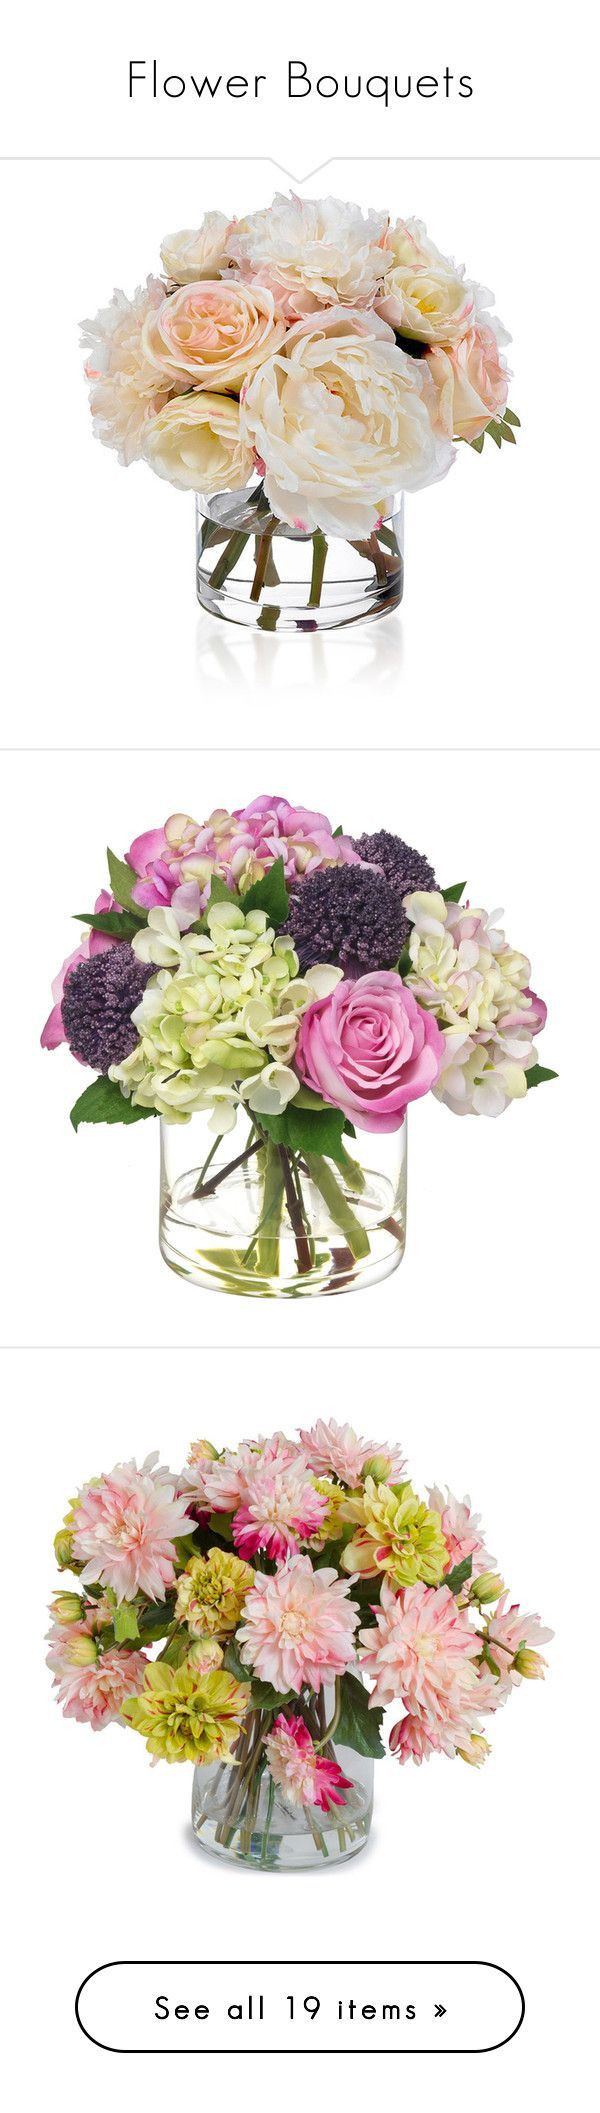 fake flower vase fillers of flower bouquets by anetacerna a¤ liked on polyvore featuring home inside flower bouquets by anetacerna a¤ liked on polyvore featuring home home decor floral decor flowers filler plants decor silk arrangements s